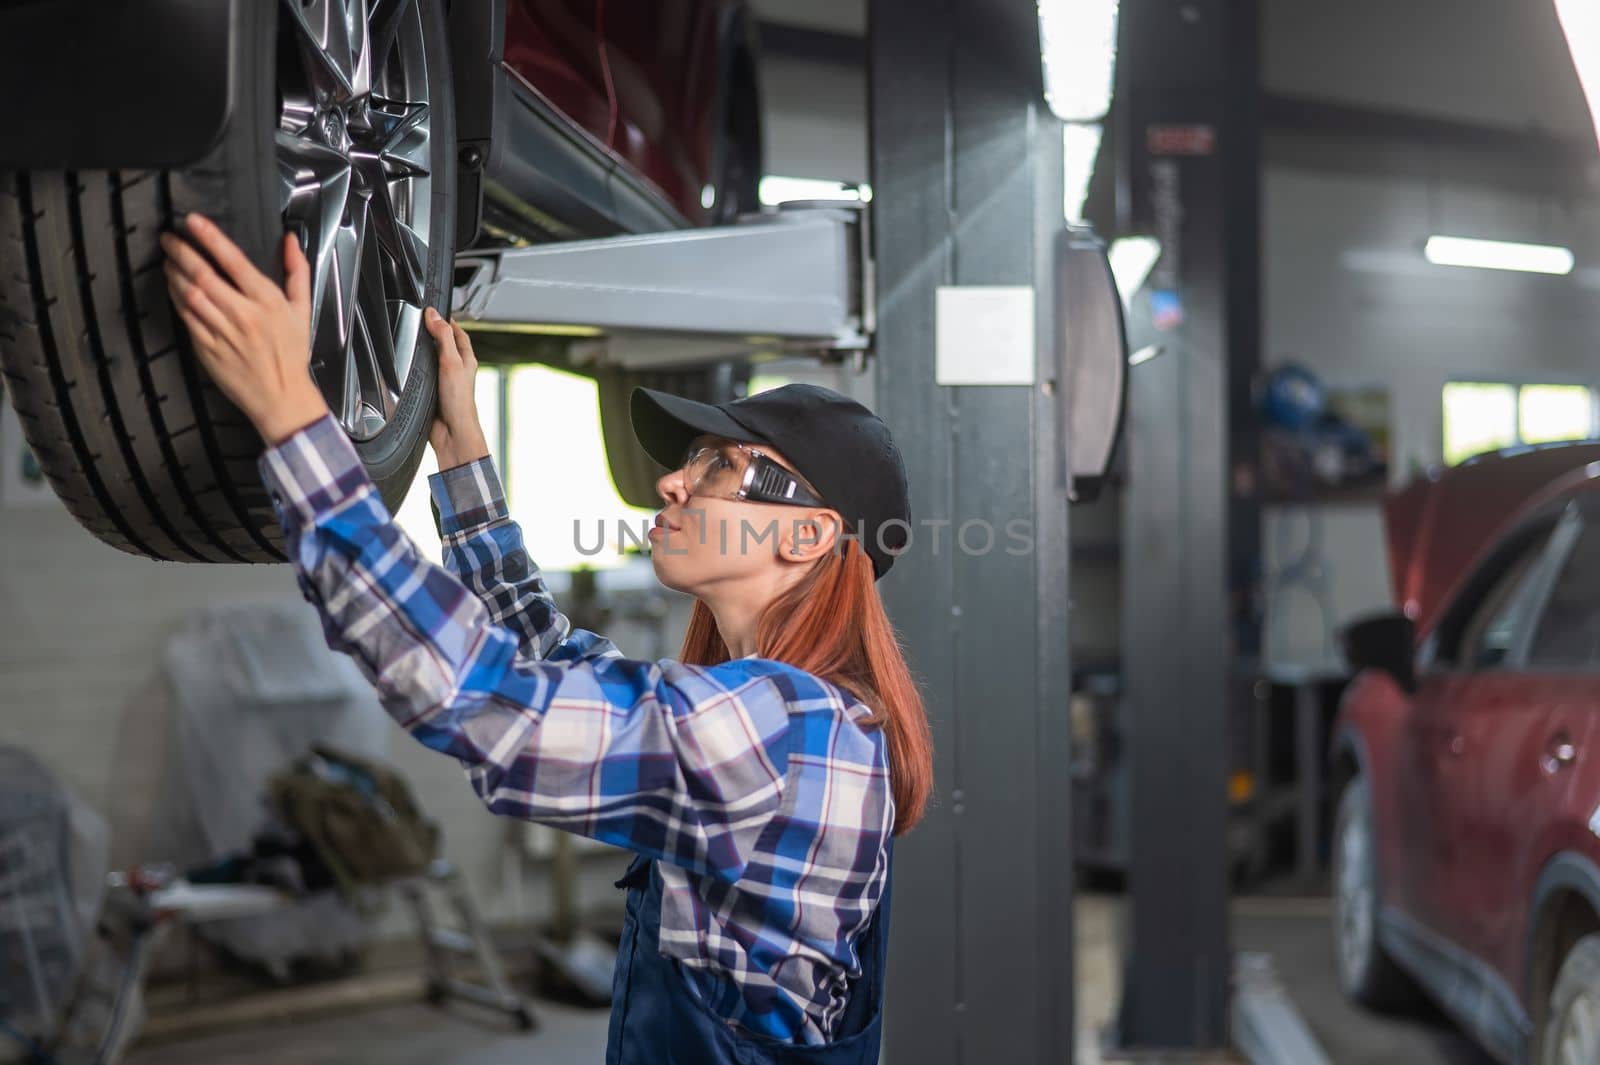 Female mechanic adjusting the tire of the car that is on the lift. A girl at a man's work